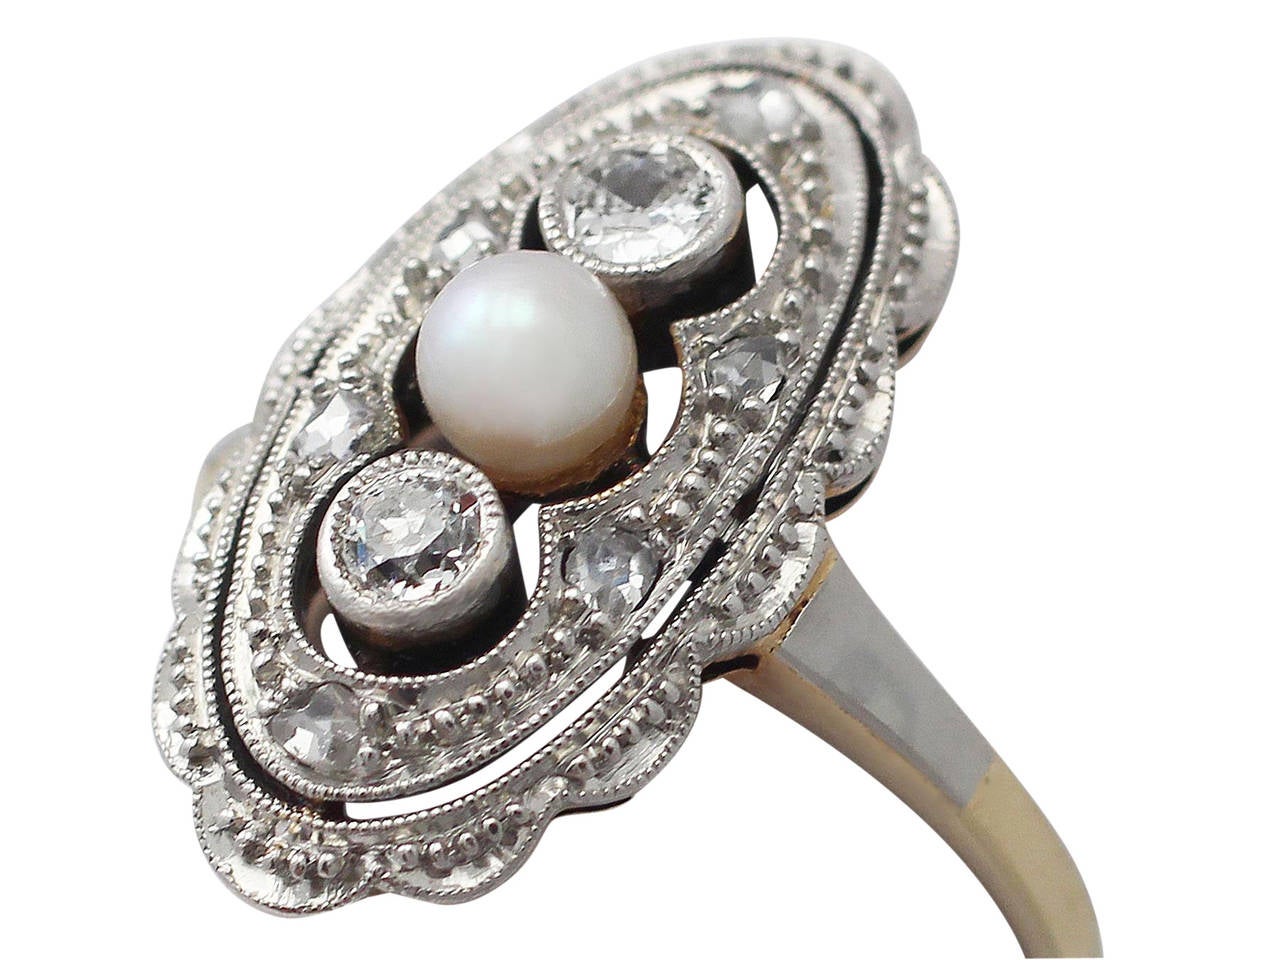 A fine and impressive antique 0.25 carat diamond and seed pearl, 14 karat yellow gold, 14k white gold set dress ring; part our antique jewelry and estate jewelry collections

This fine antique diamond and pearl ring has been crafted in 14k yellow